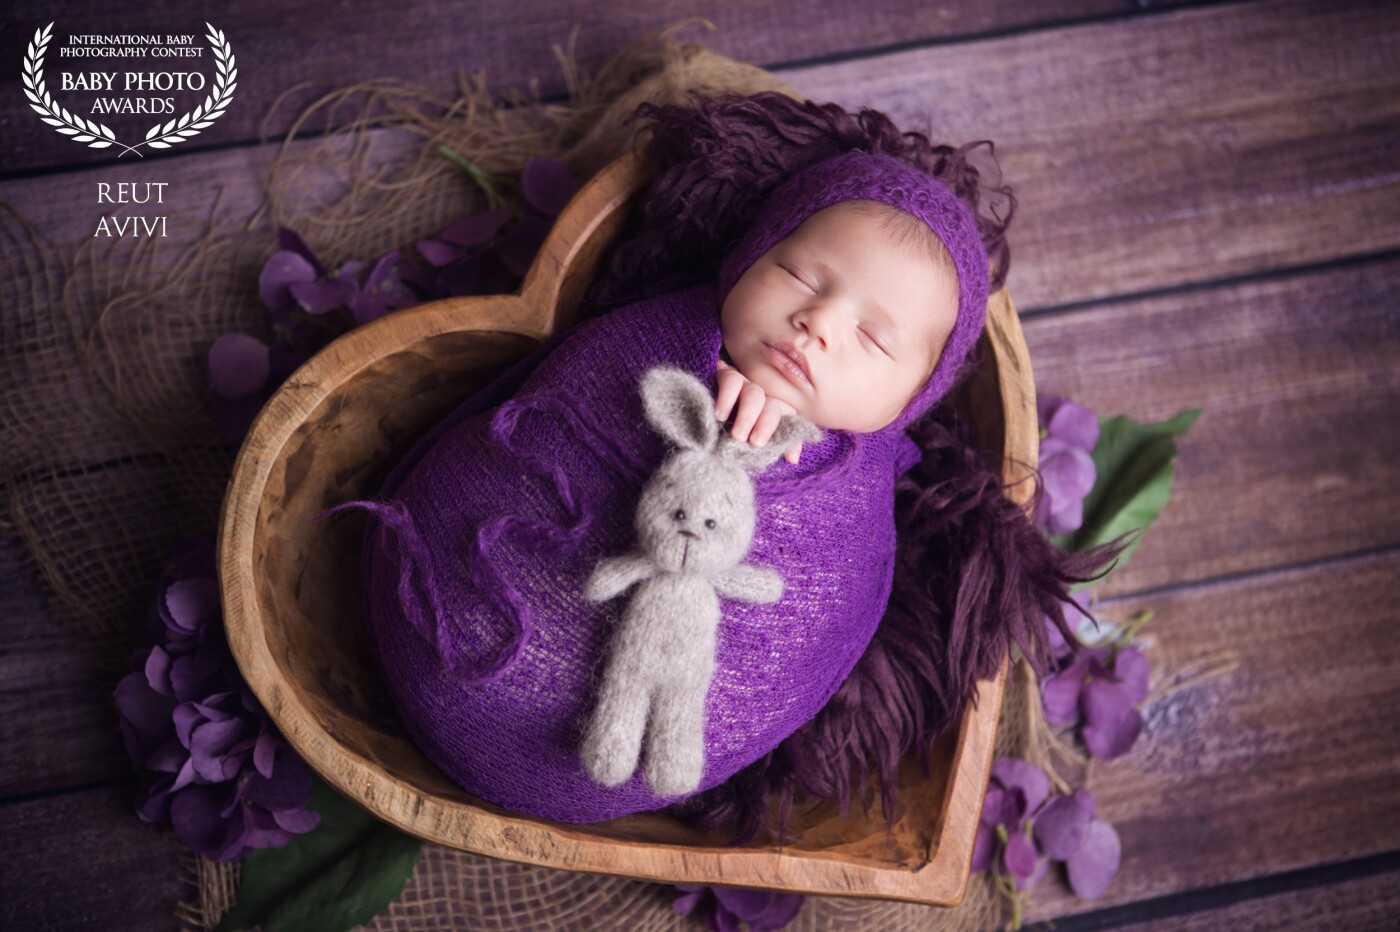 A stunning 3-week old Abigail, The little princess of the house, perfect in purple.